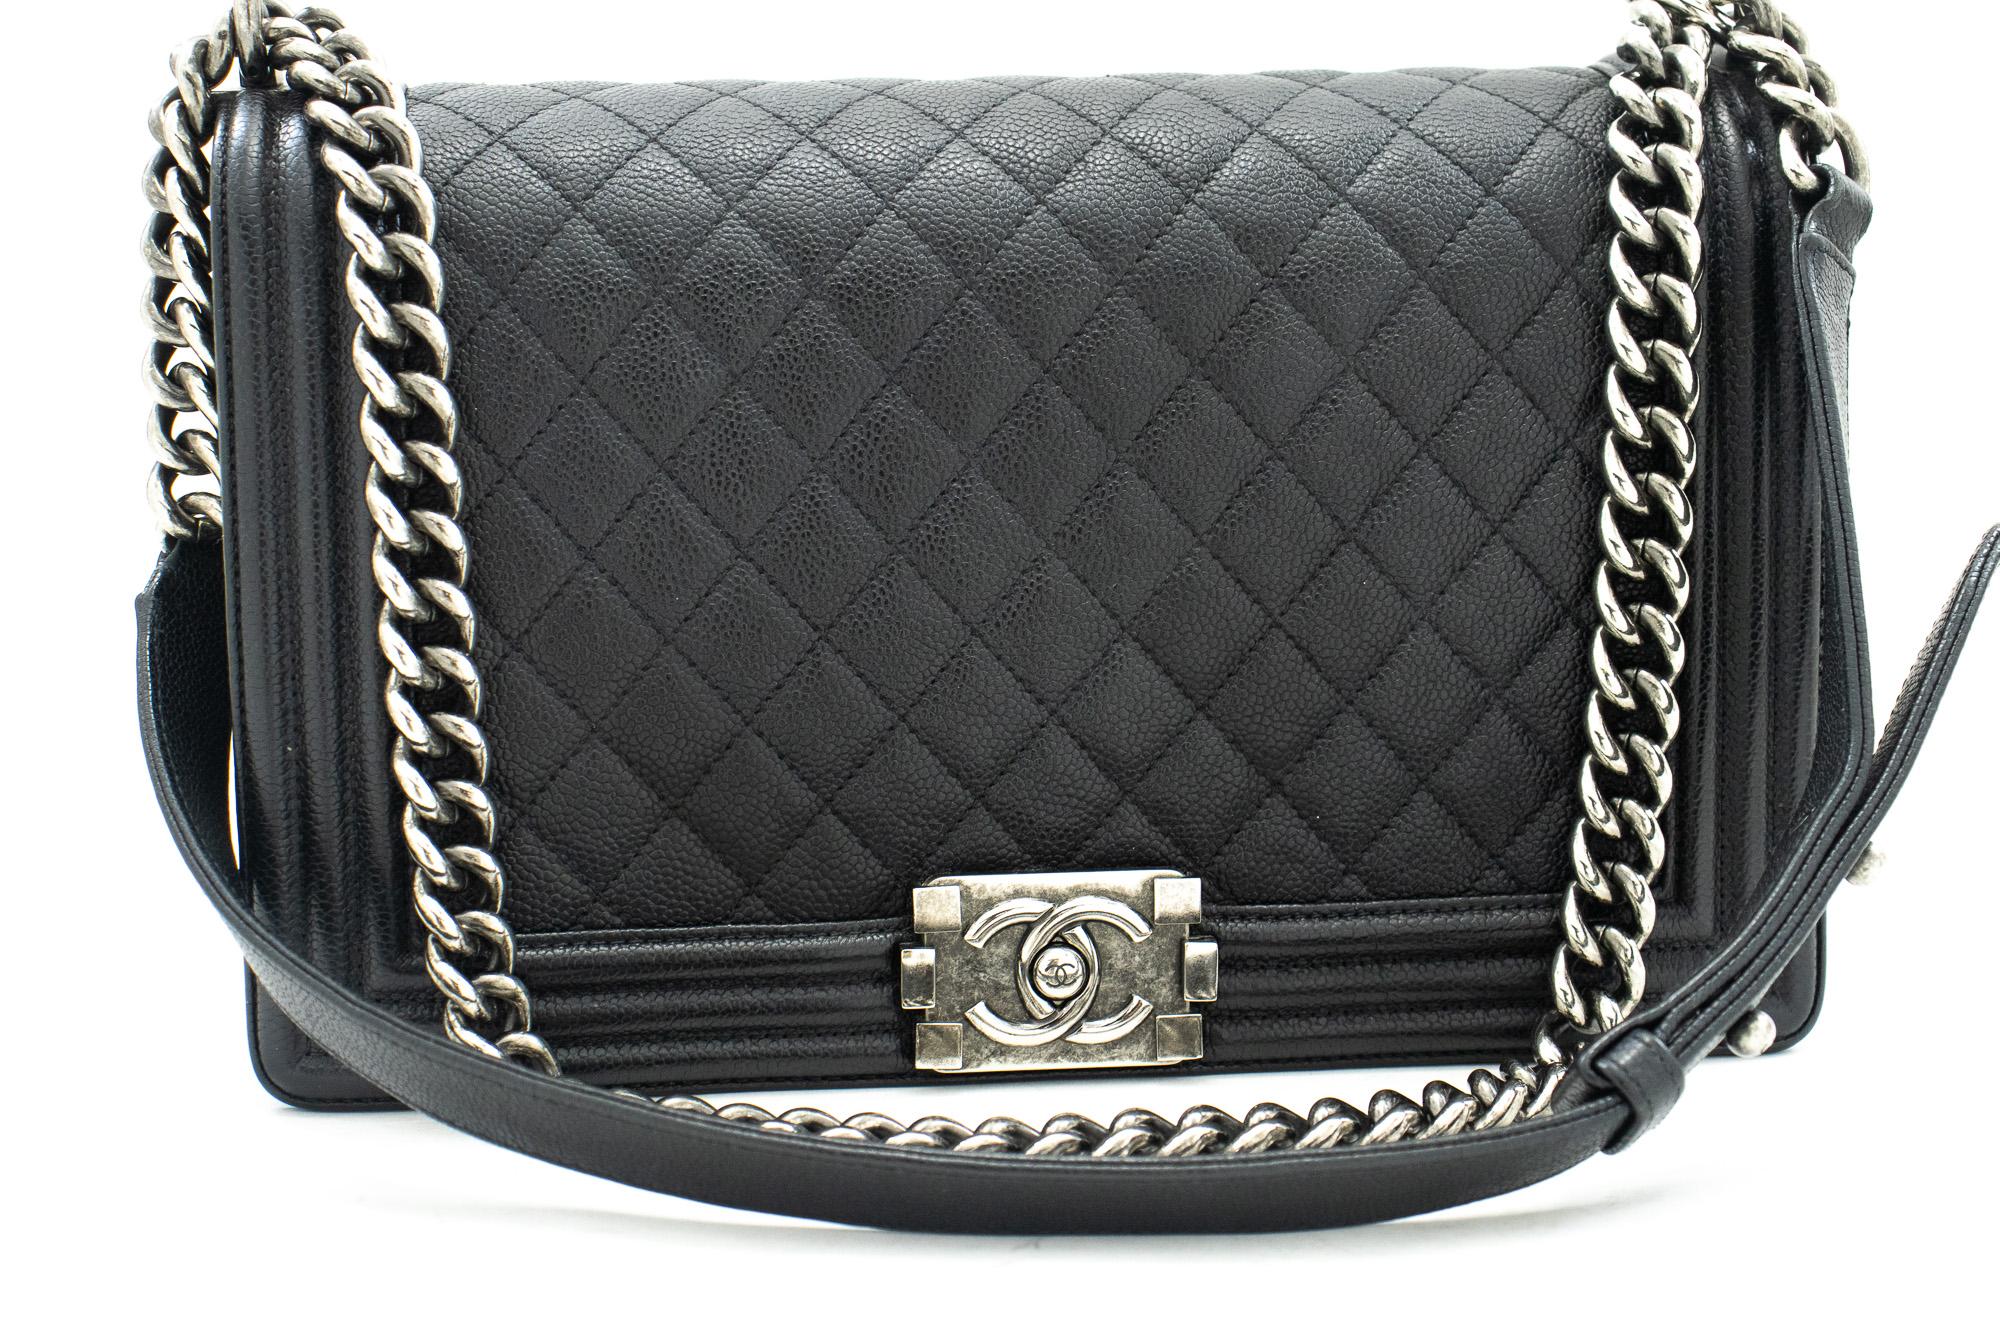 An authentic CHANEL Boy Grained Calfskin Chain Shoulder Bag Black Caviar Quilt. The color is Black. The outside material is Leather. The pattern is Solid. This item is Contemporary. The year of manufacture would be 2016.
Conditions & Ratings
Outside